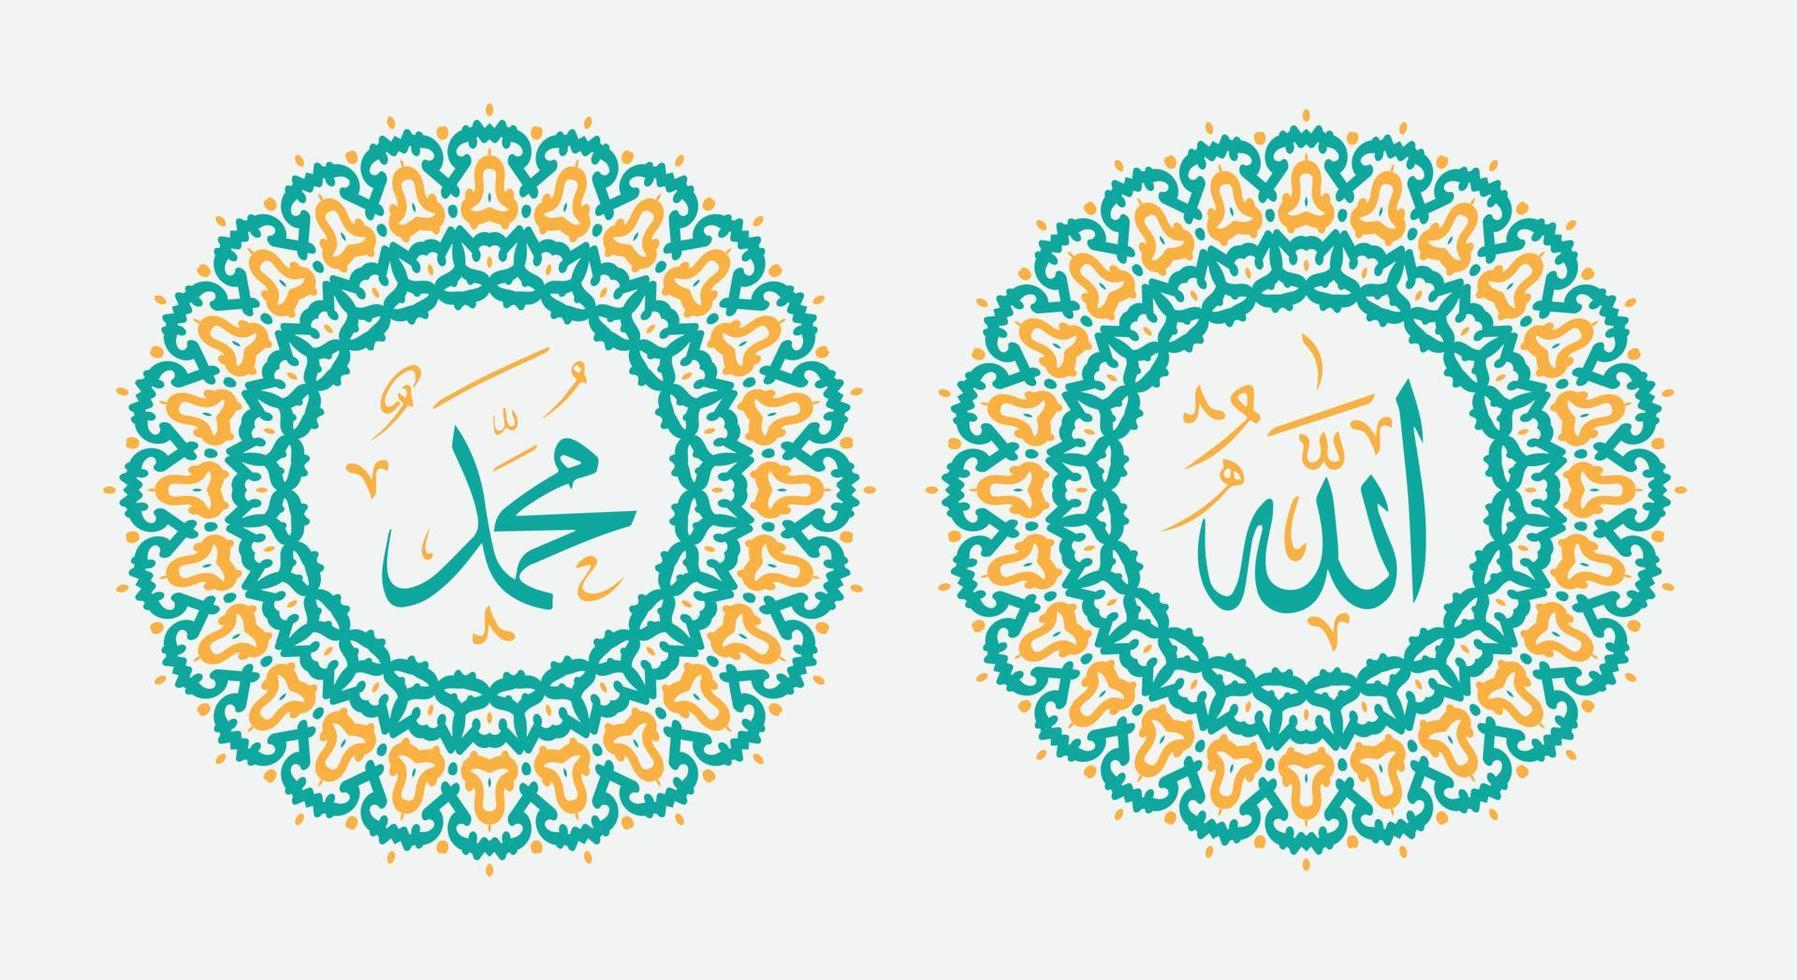 allah muhammad arabic calligraphy with round ornament and cool color vector